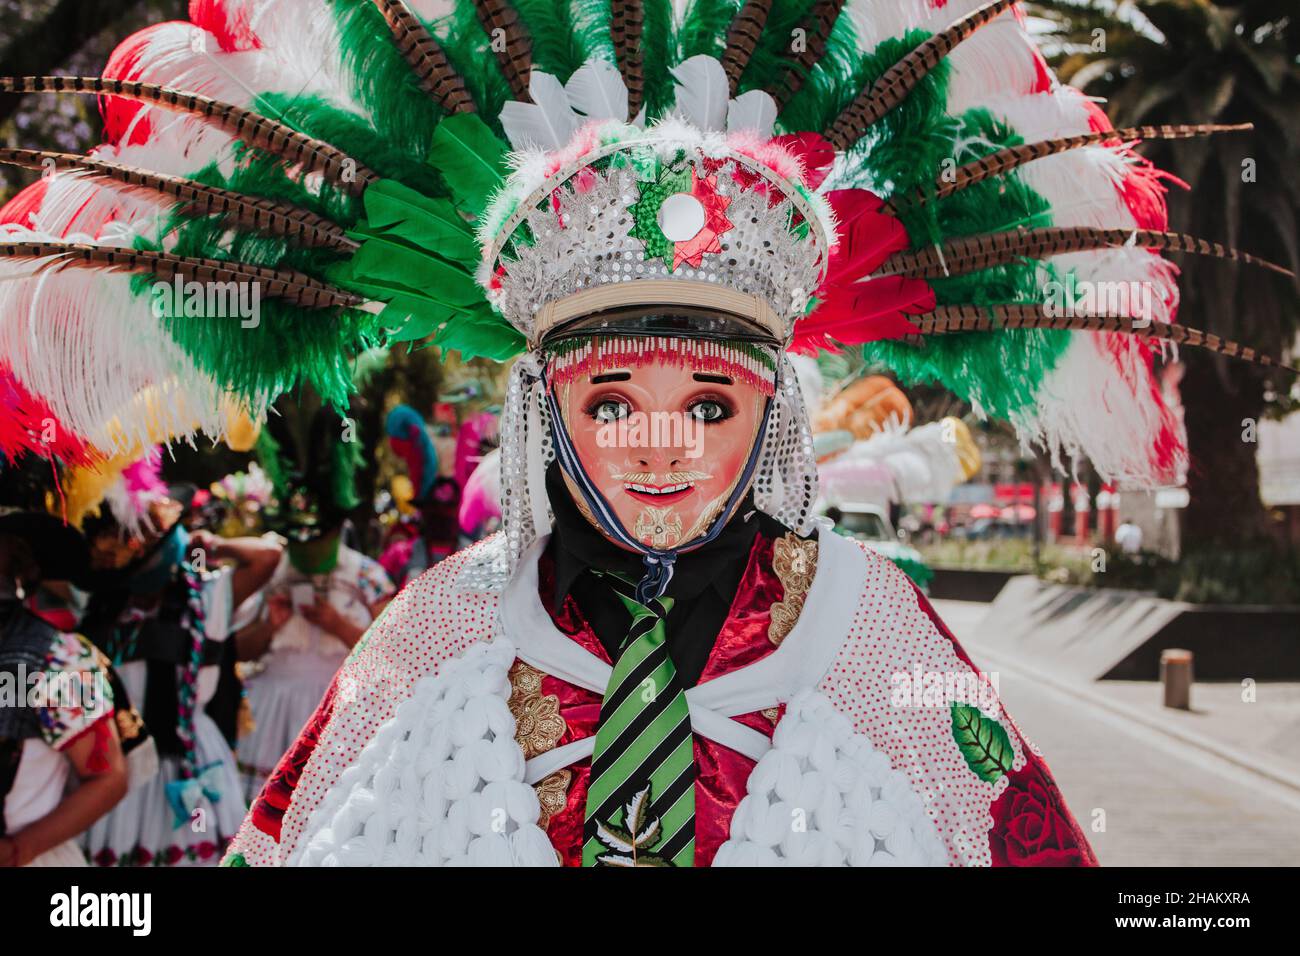 Huehues Mexico, mexican Carnival dancer wearing a traditional folk costume and mask in Latin America Stock Photo